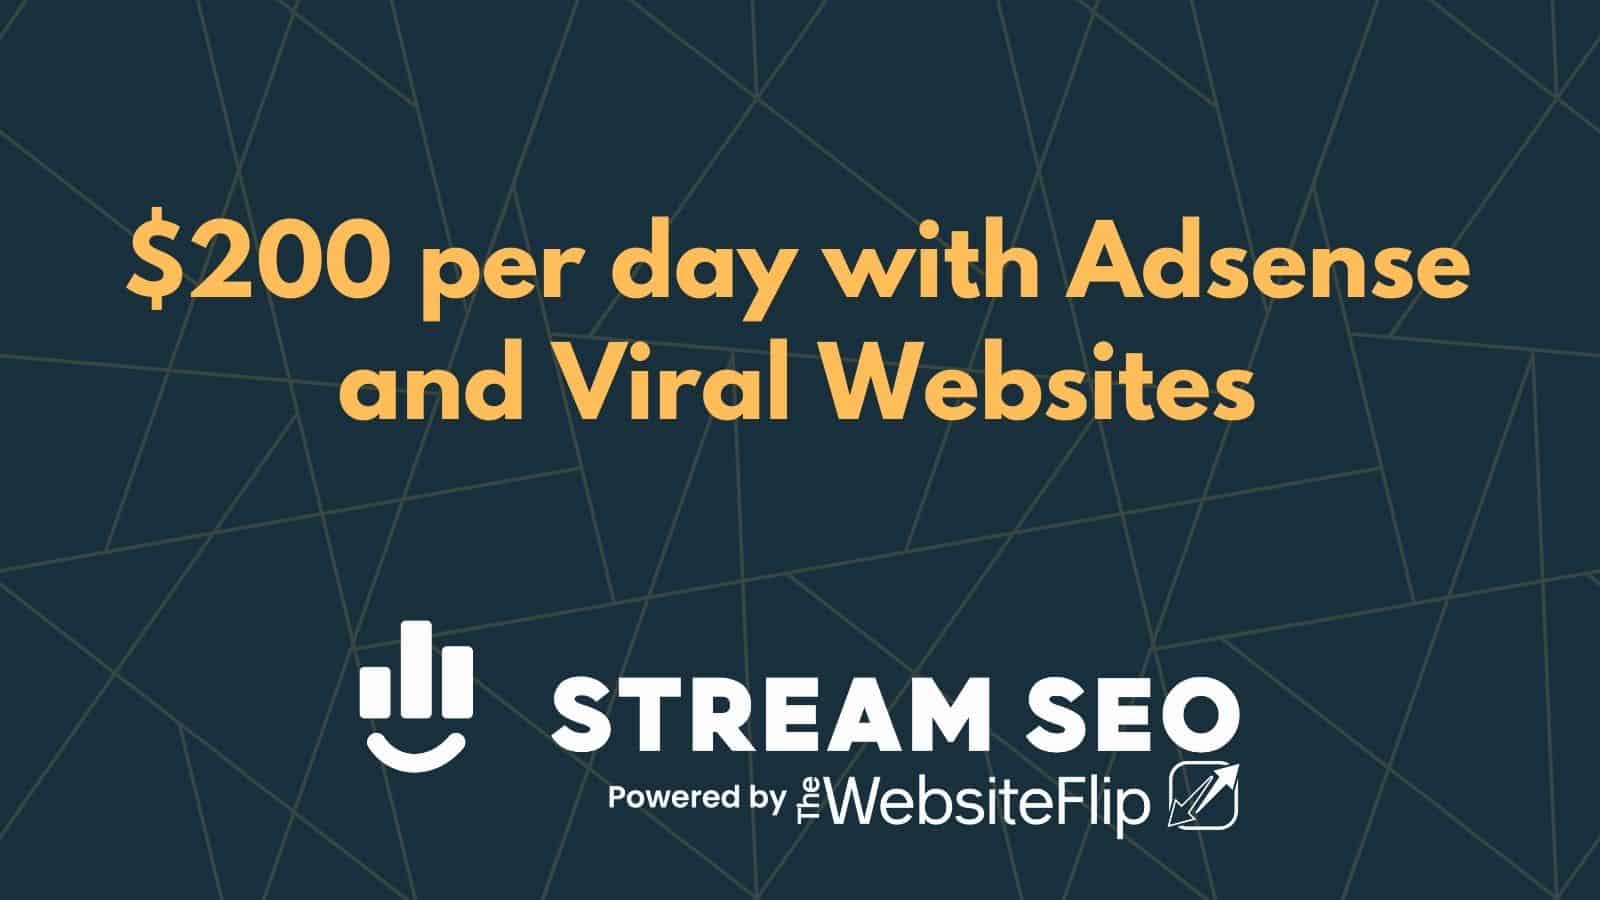 $200 per day with Adsense and Viral Websites